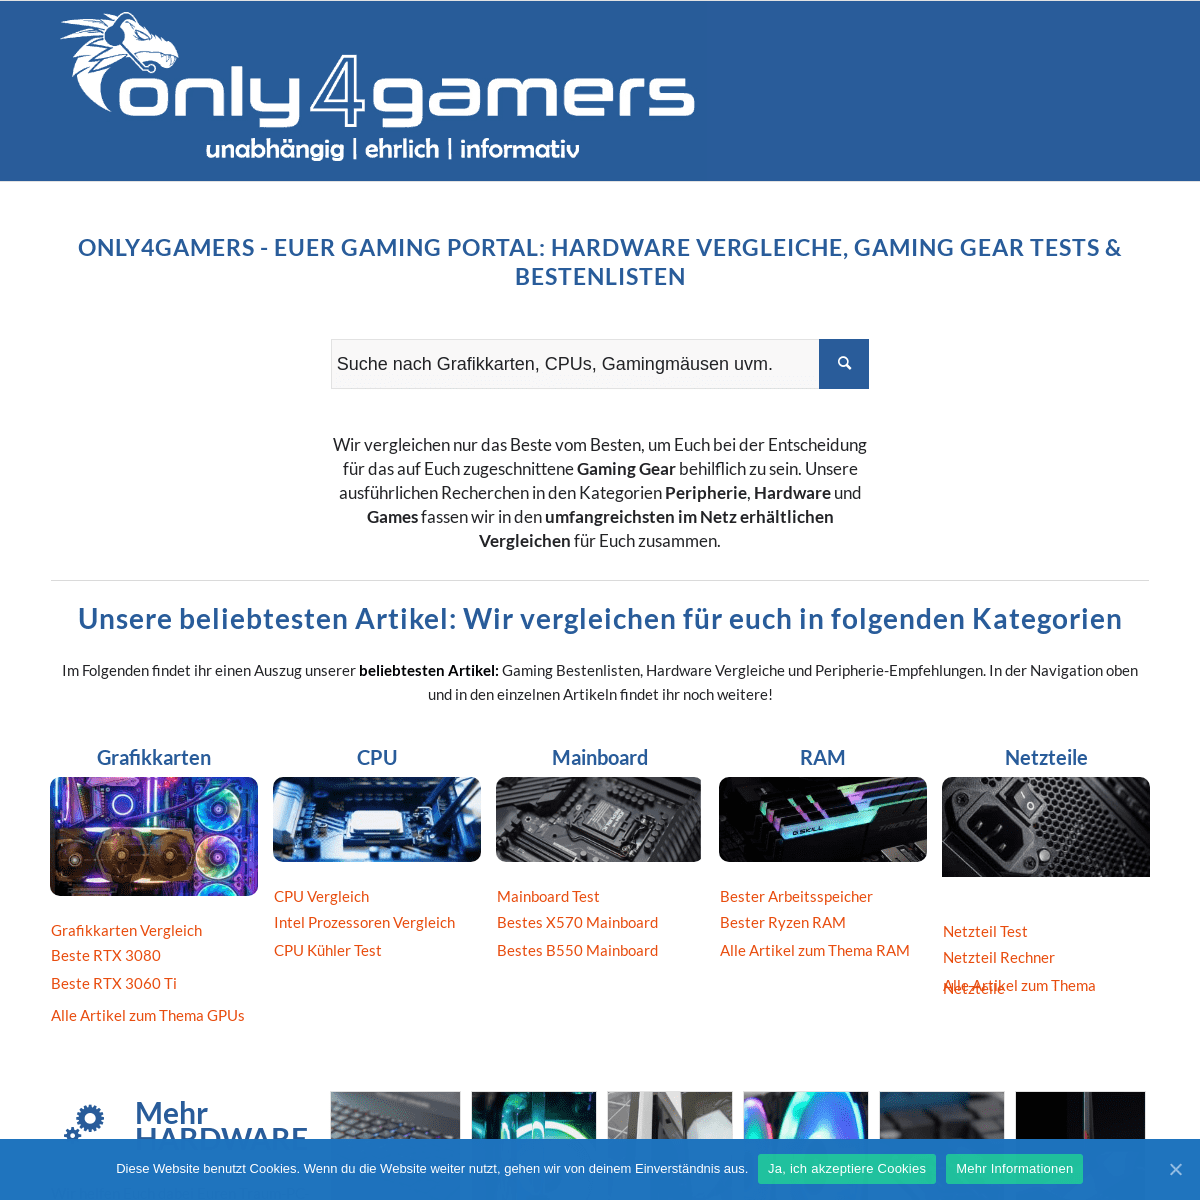 A complete backup of https://only4gamers.de